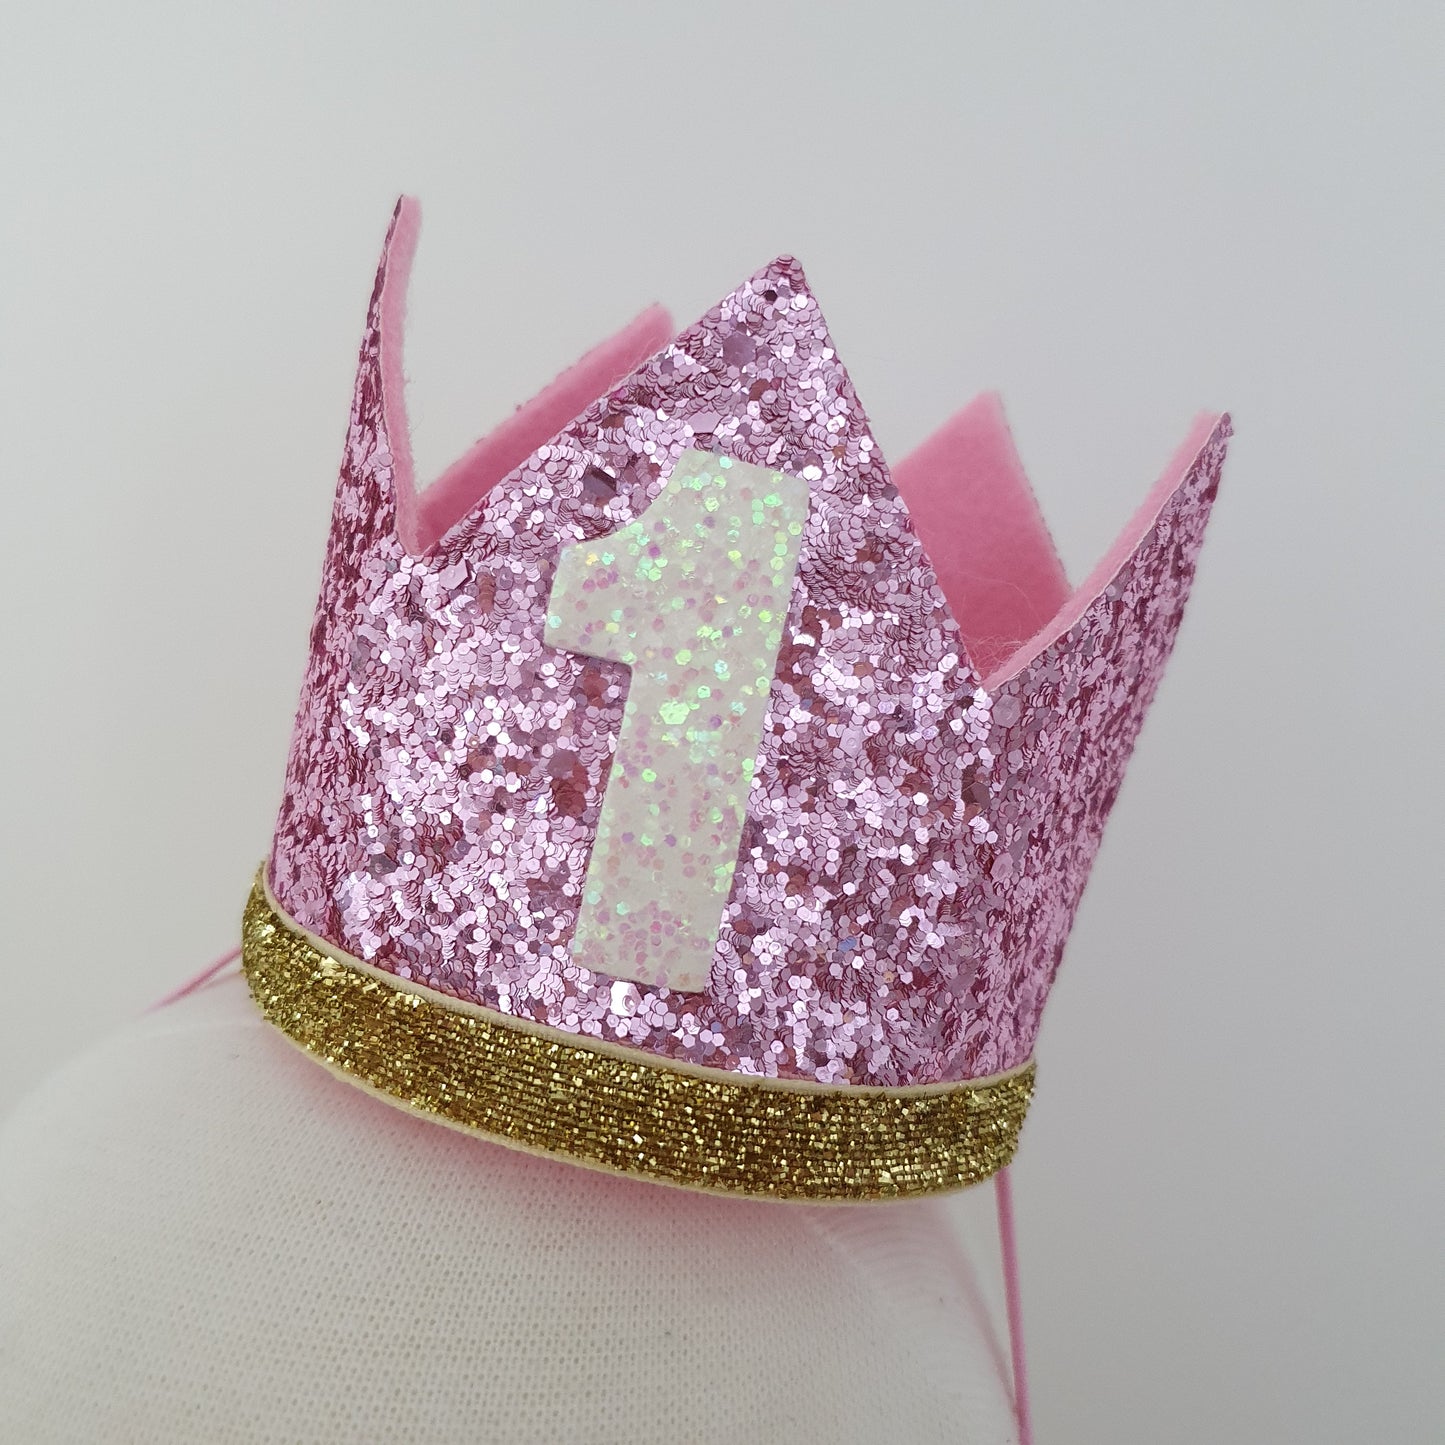 Girls 1st Birthday Outfit - Cake Smash Outfit, Size 1, Nappy Cover, Headband, Crown & Singlet Set, PINK SCALES